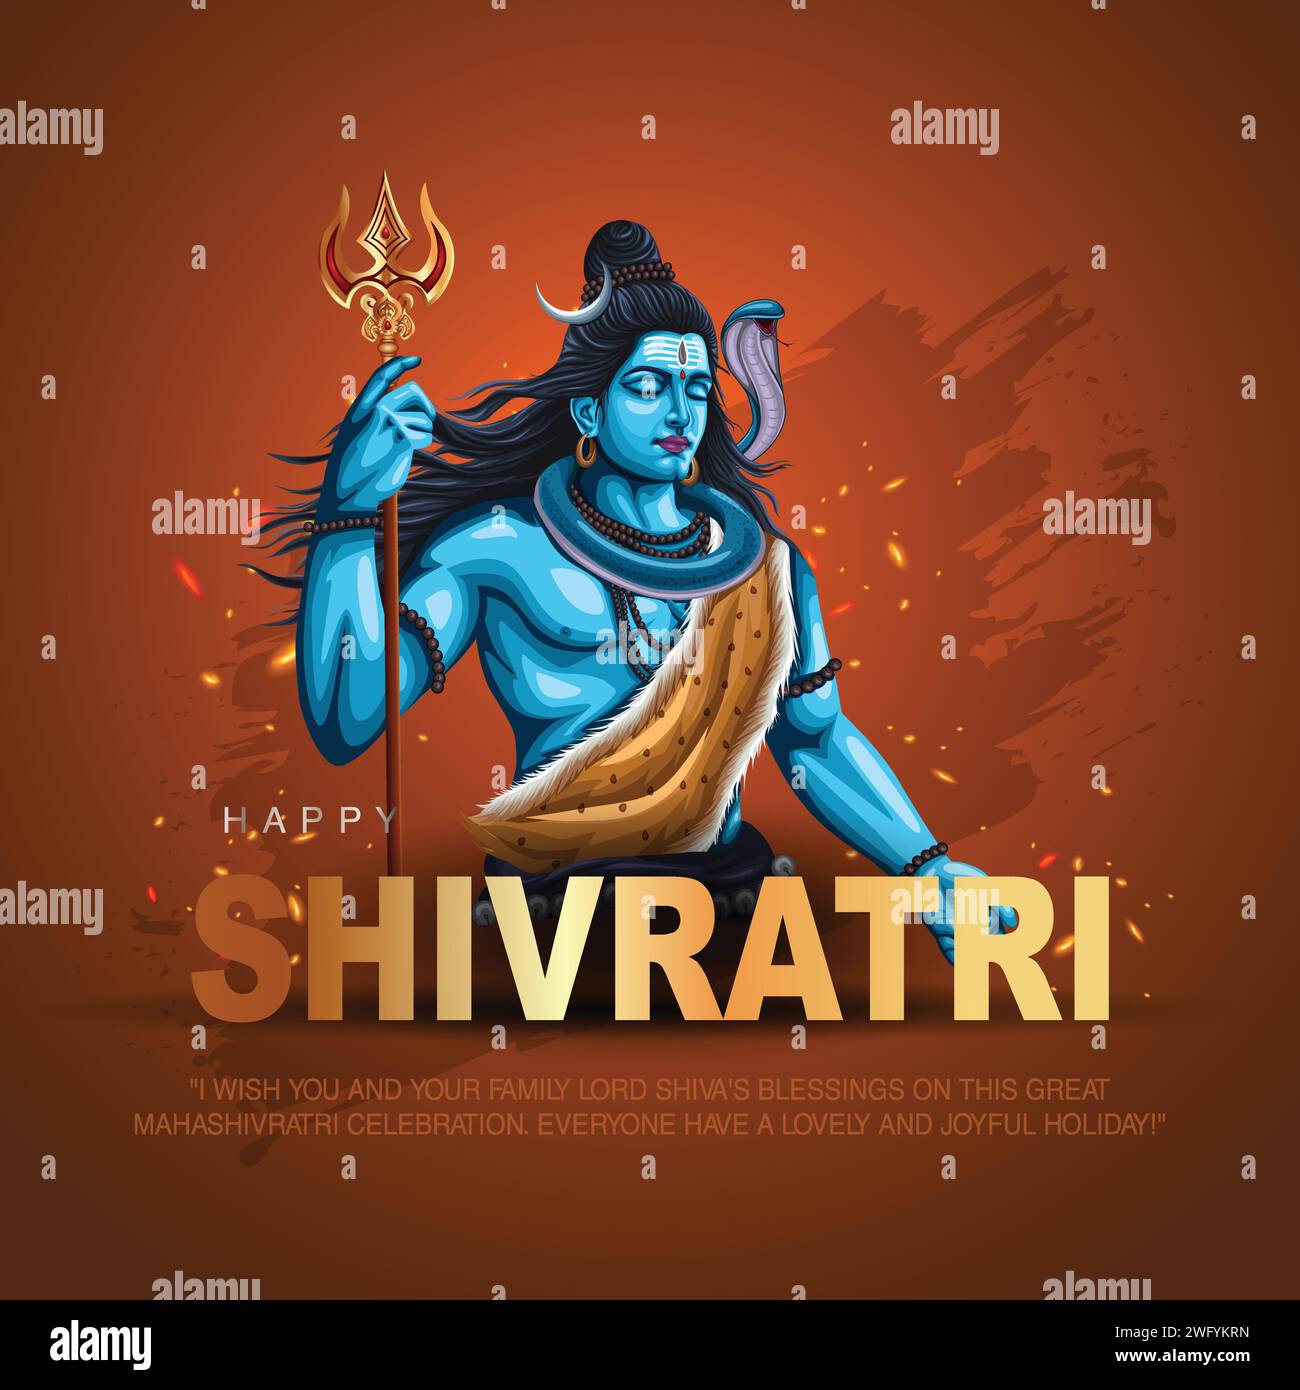 What are some signs that show Lord Shiva is listening to you? - Quora